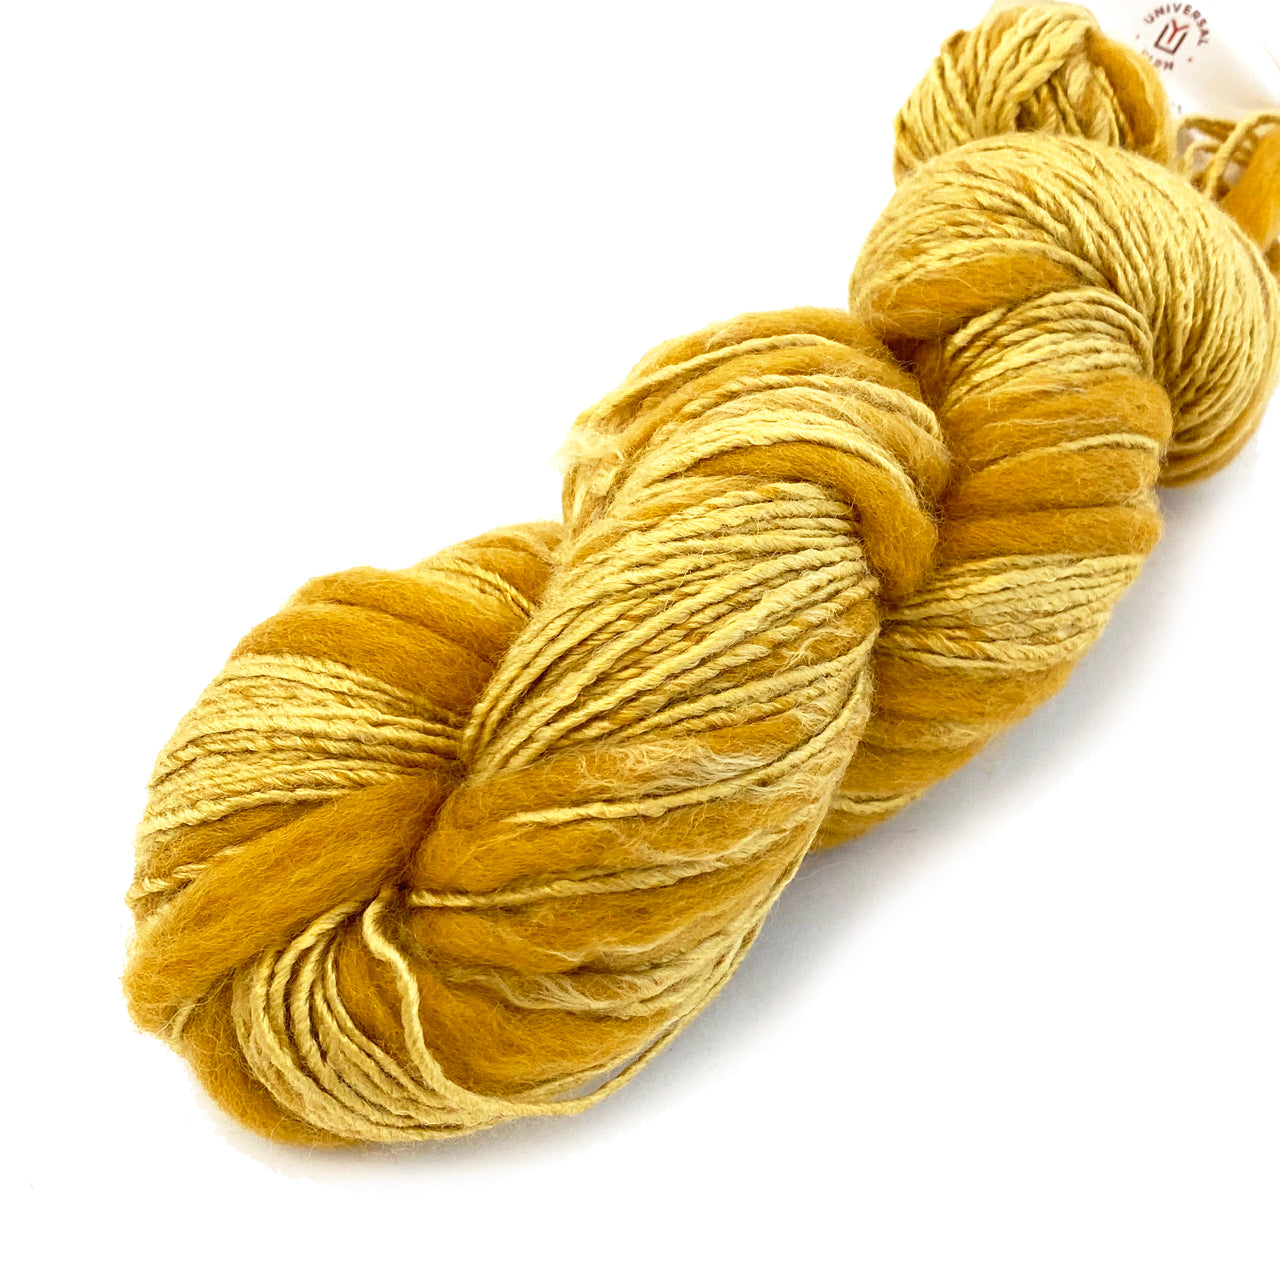 Bamboo Bloom Yarn - 7 Colors Available - Color Crazy